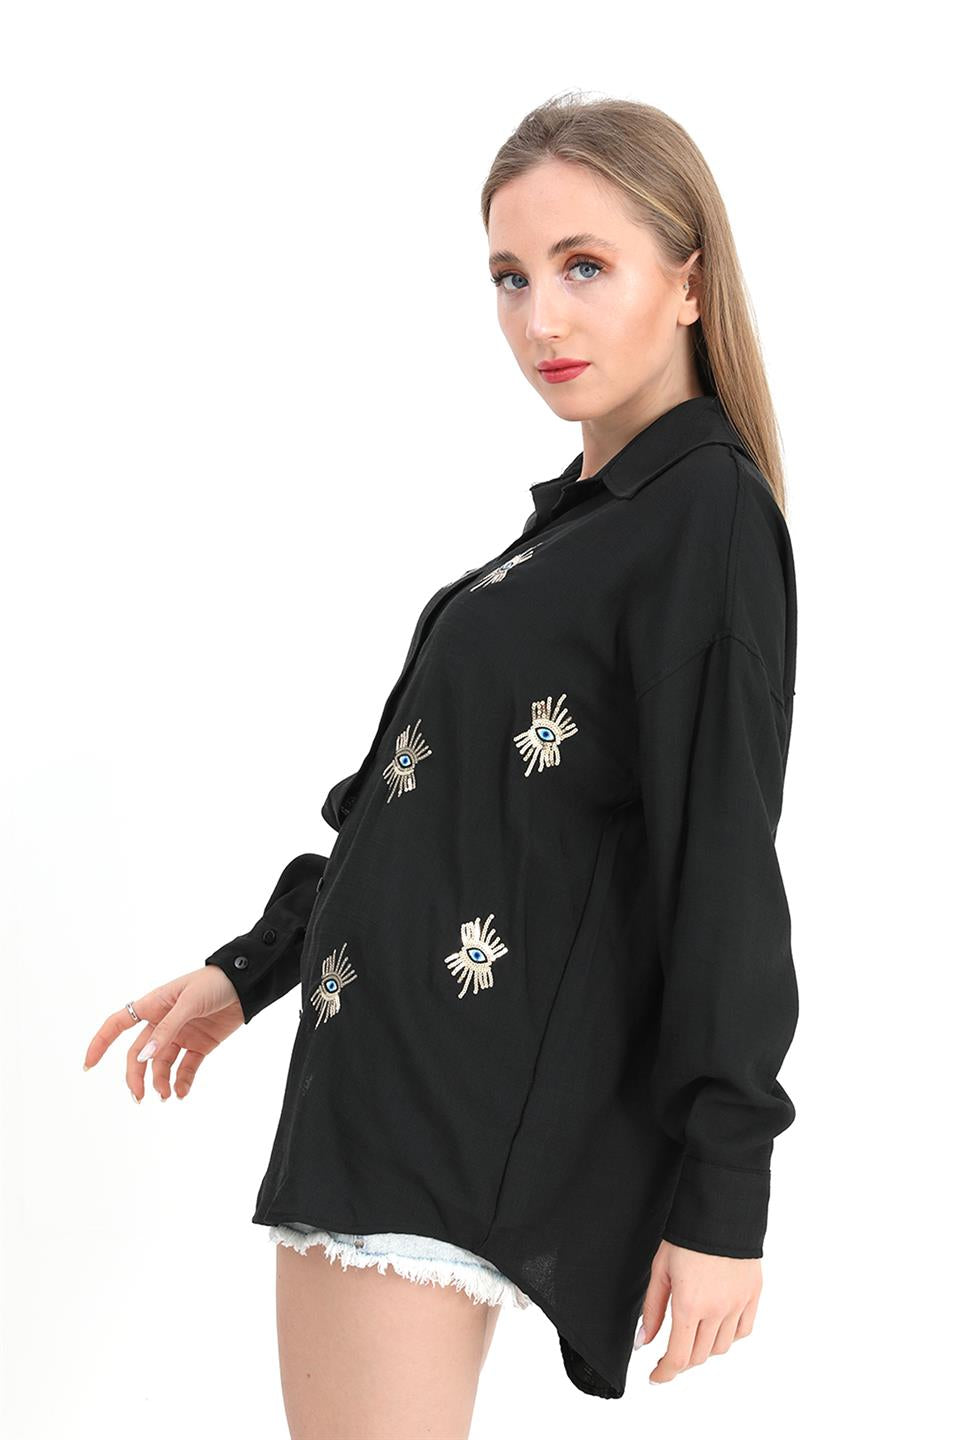 Women's Shirt Linen With Eye Embroidery - Black - STREETMODE™